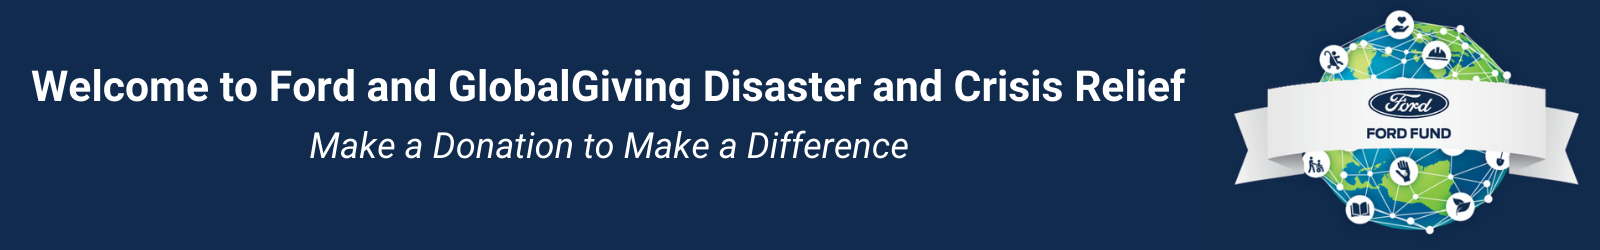 Welcome to Ford and GlobalGiving Disaster and Crisis Relief. Make a Donation to Make a Difference